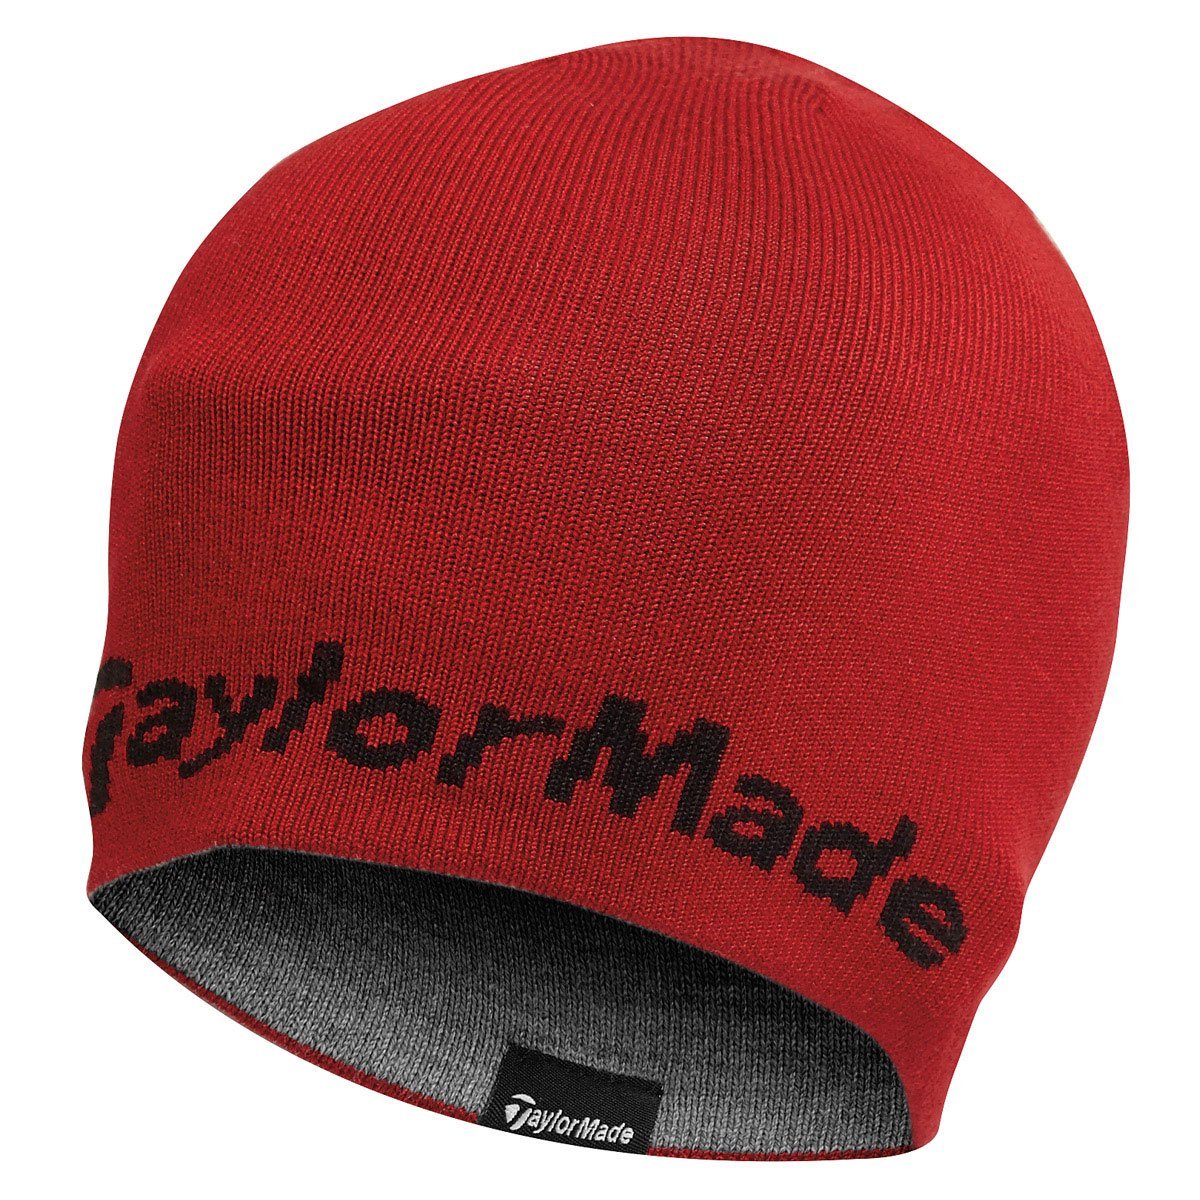 Mens Taylormade Reversible Thermal Golf Beanie Hats